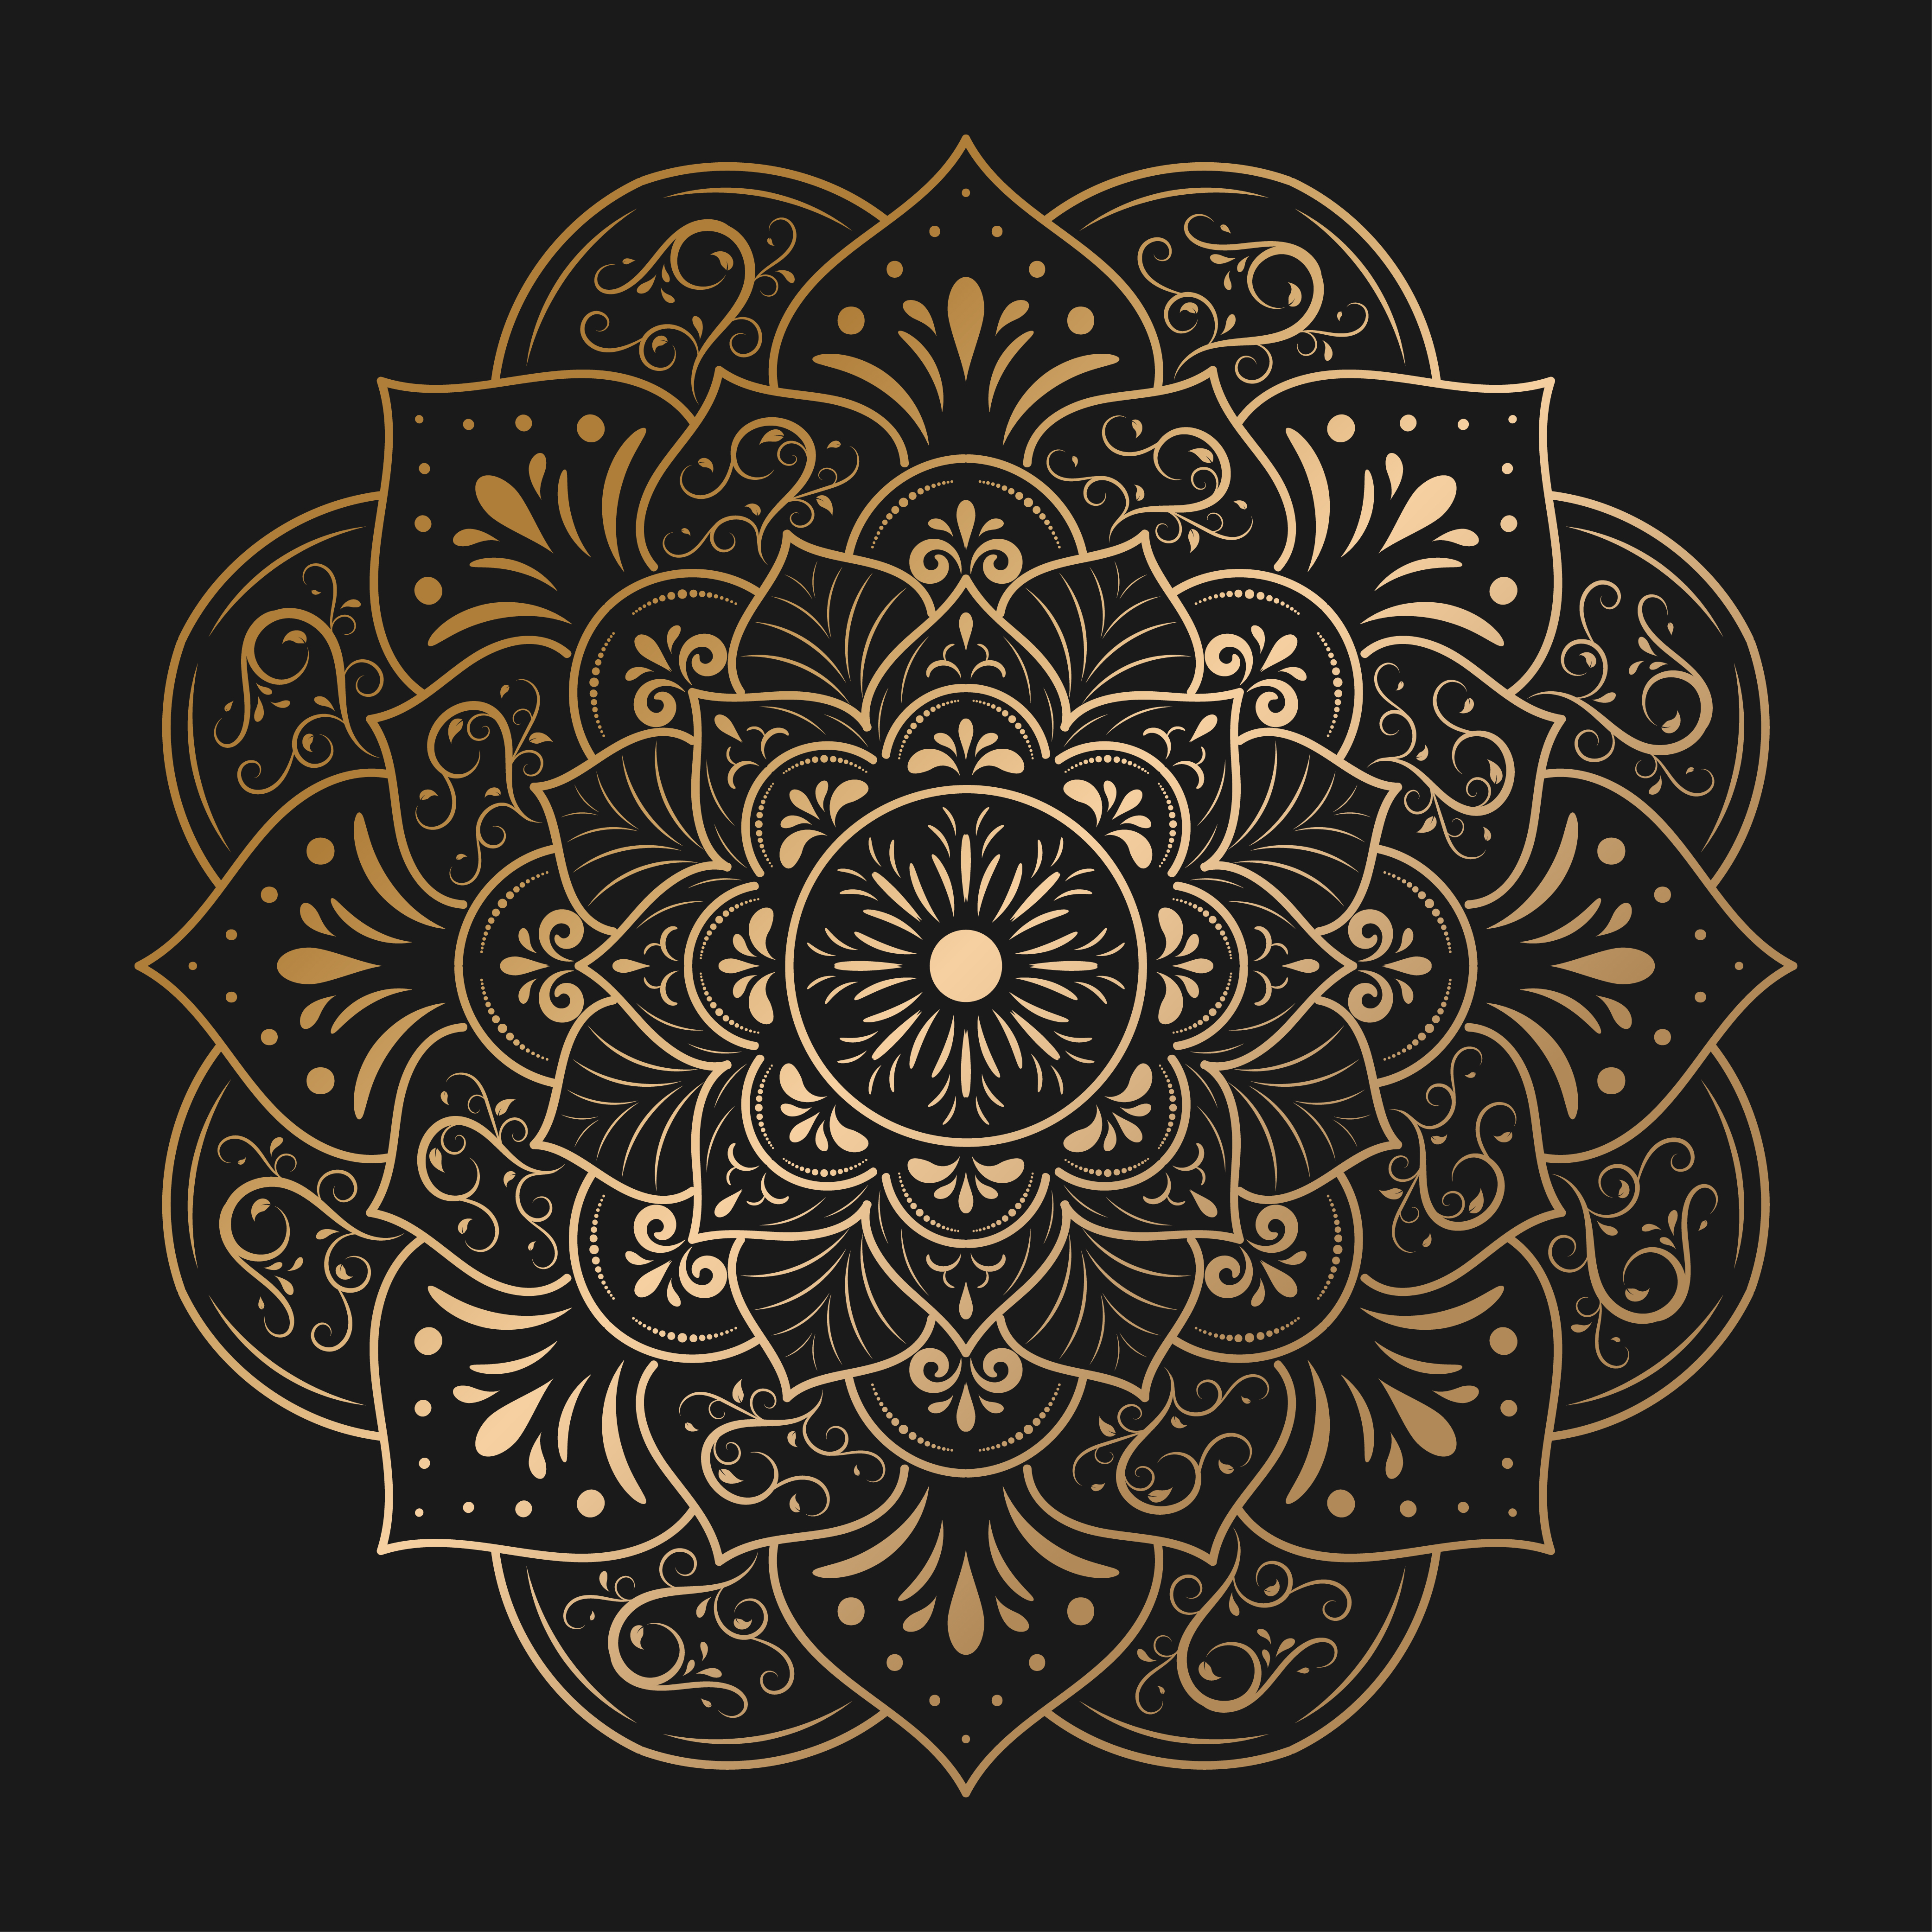 Download Circular gold mandala with vintage floral style - Download Free Vectors, Clipart Graphics ...